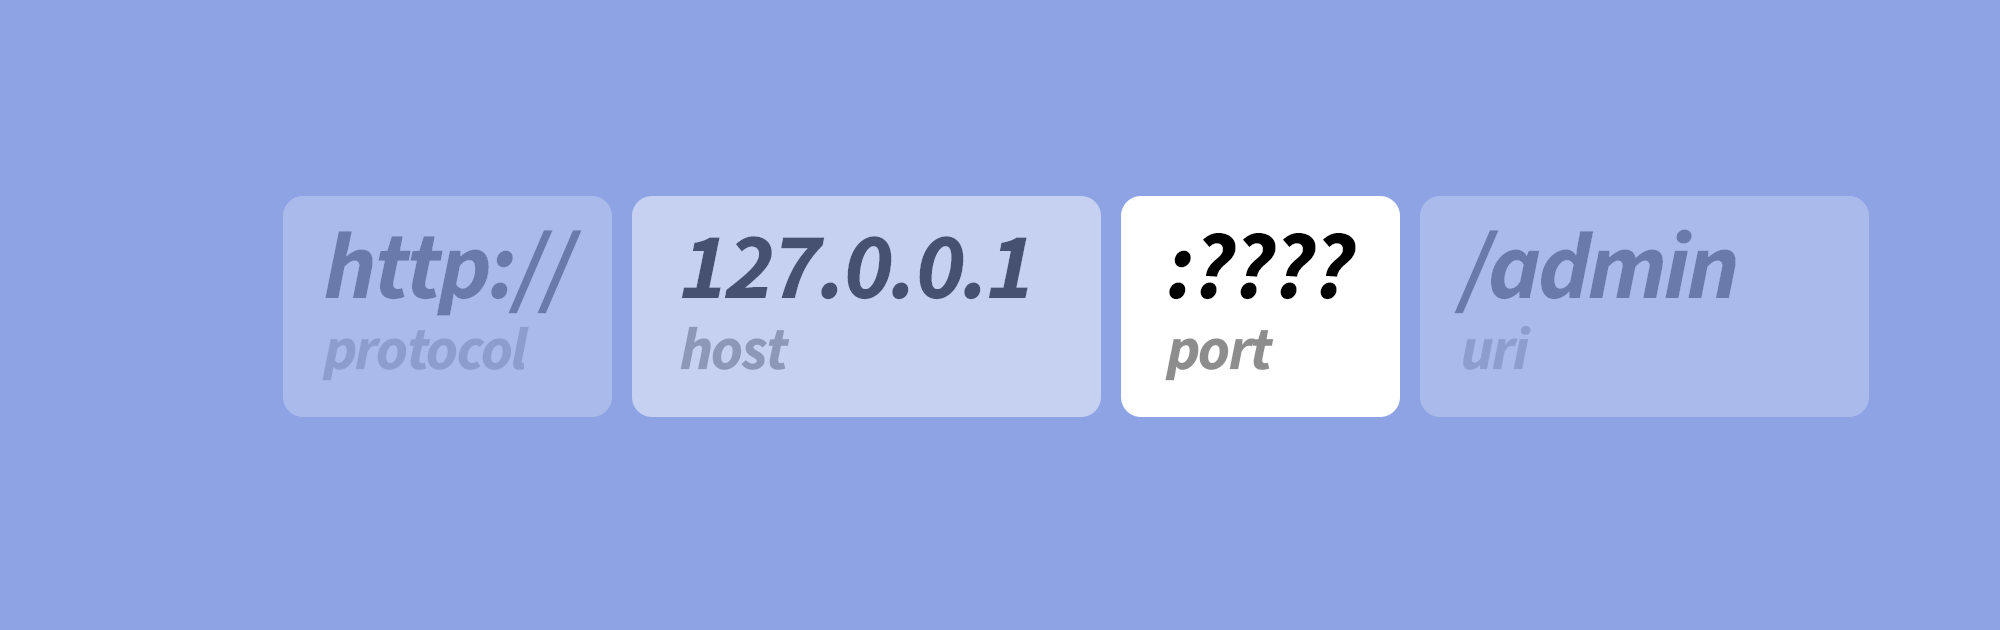 What is my Directus Port?